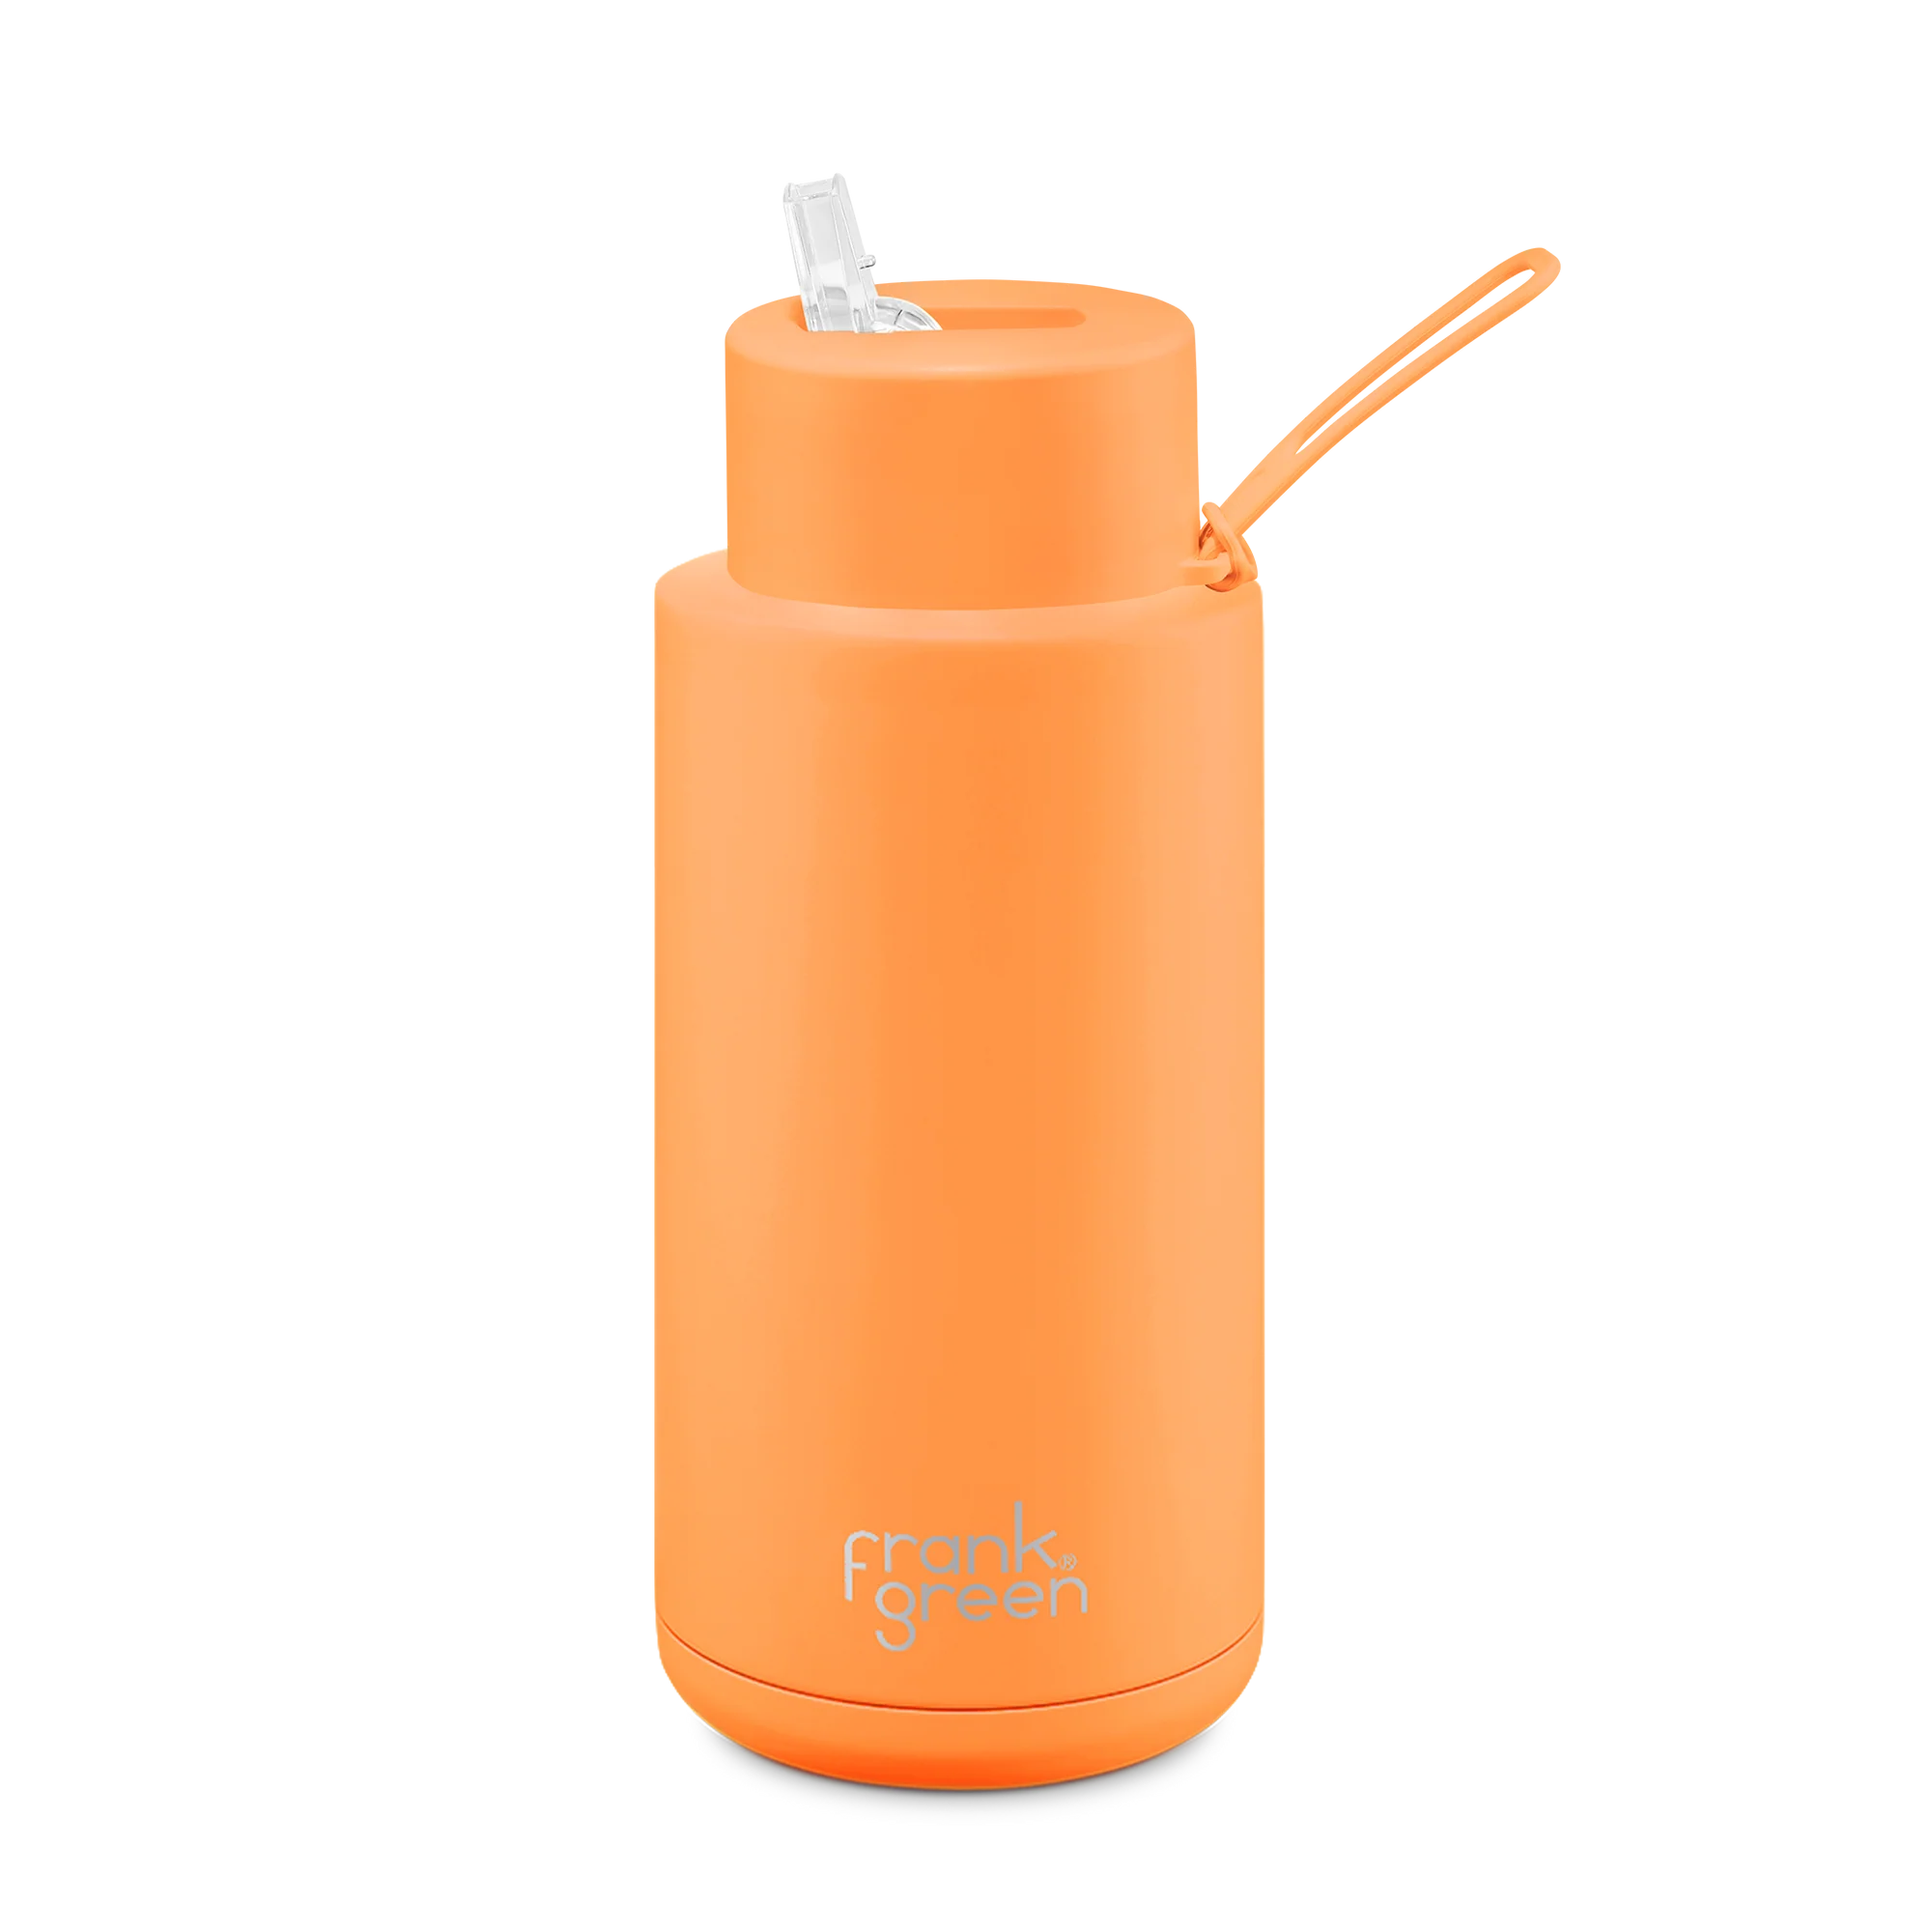 Frank Green Stainless Steel Ceramic Reusable Bottle Neon Orange With Straw And Strap 34oz/1 Ltr